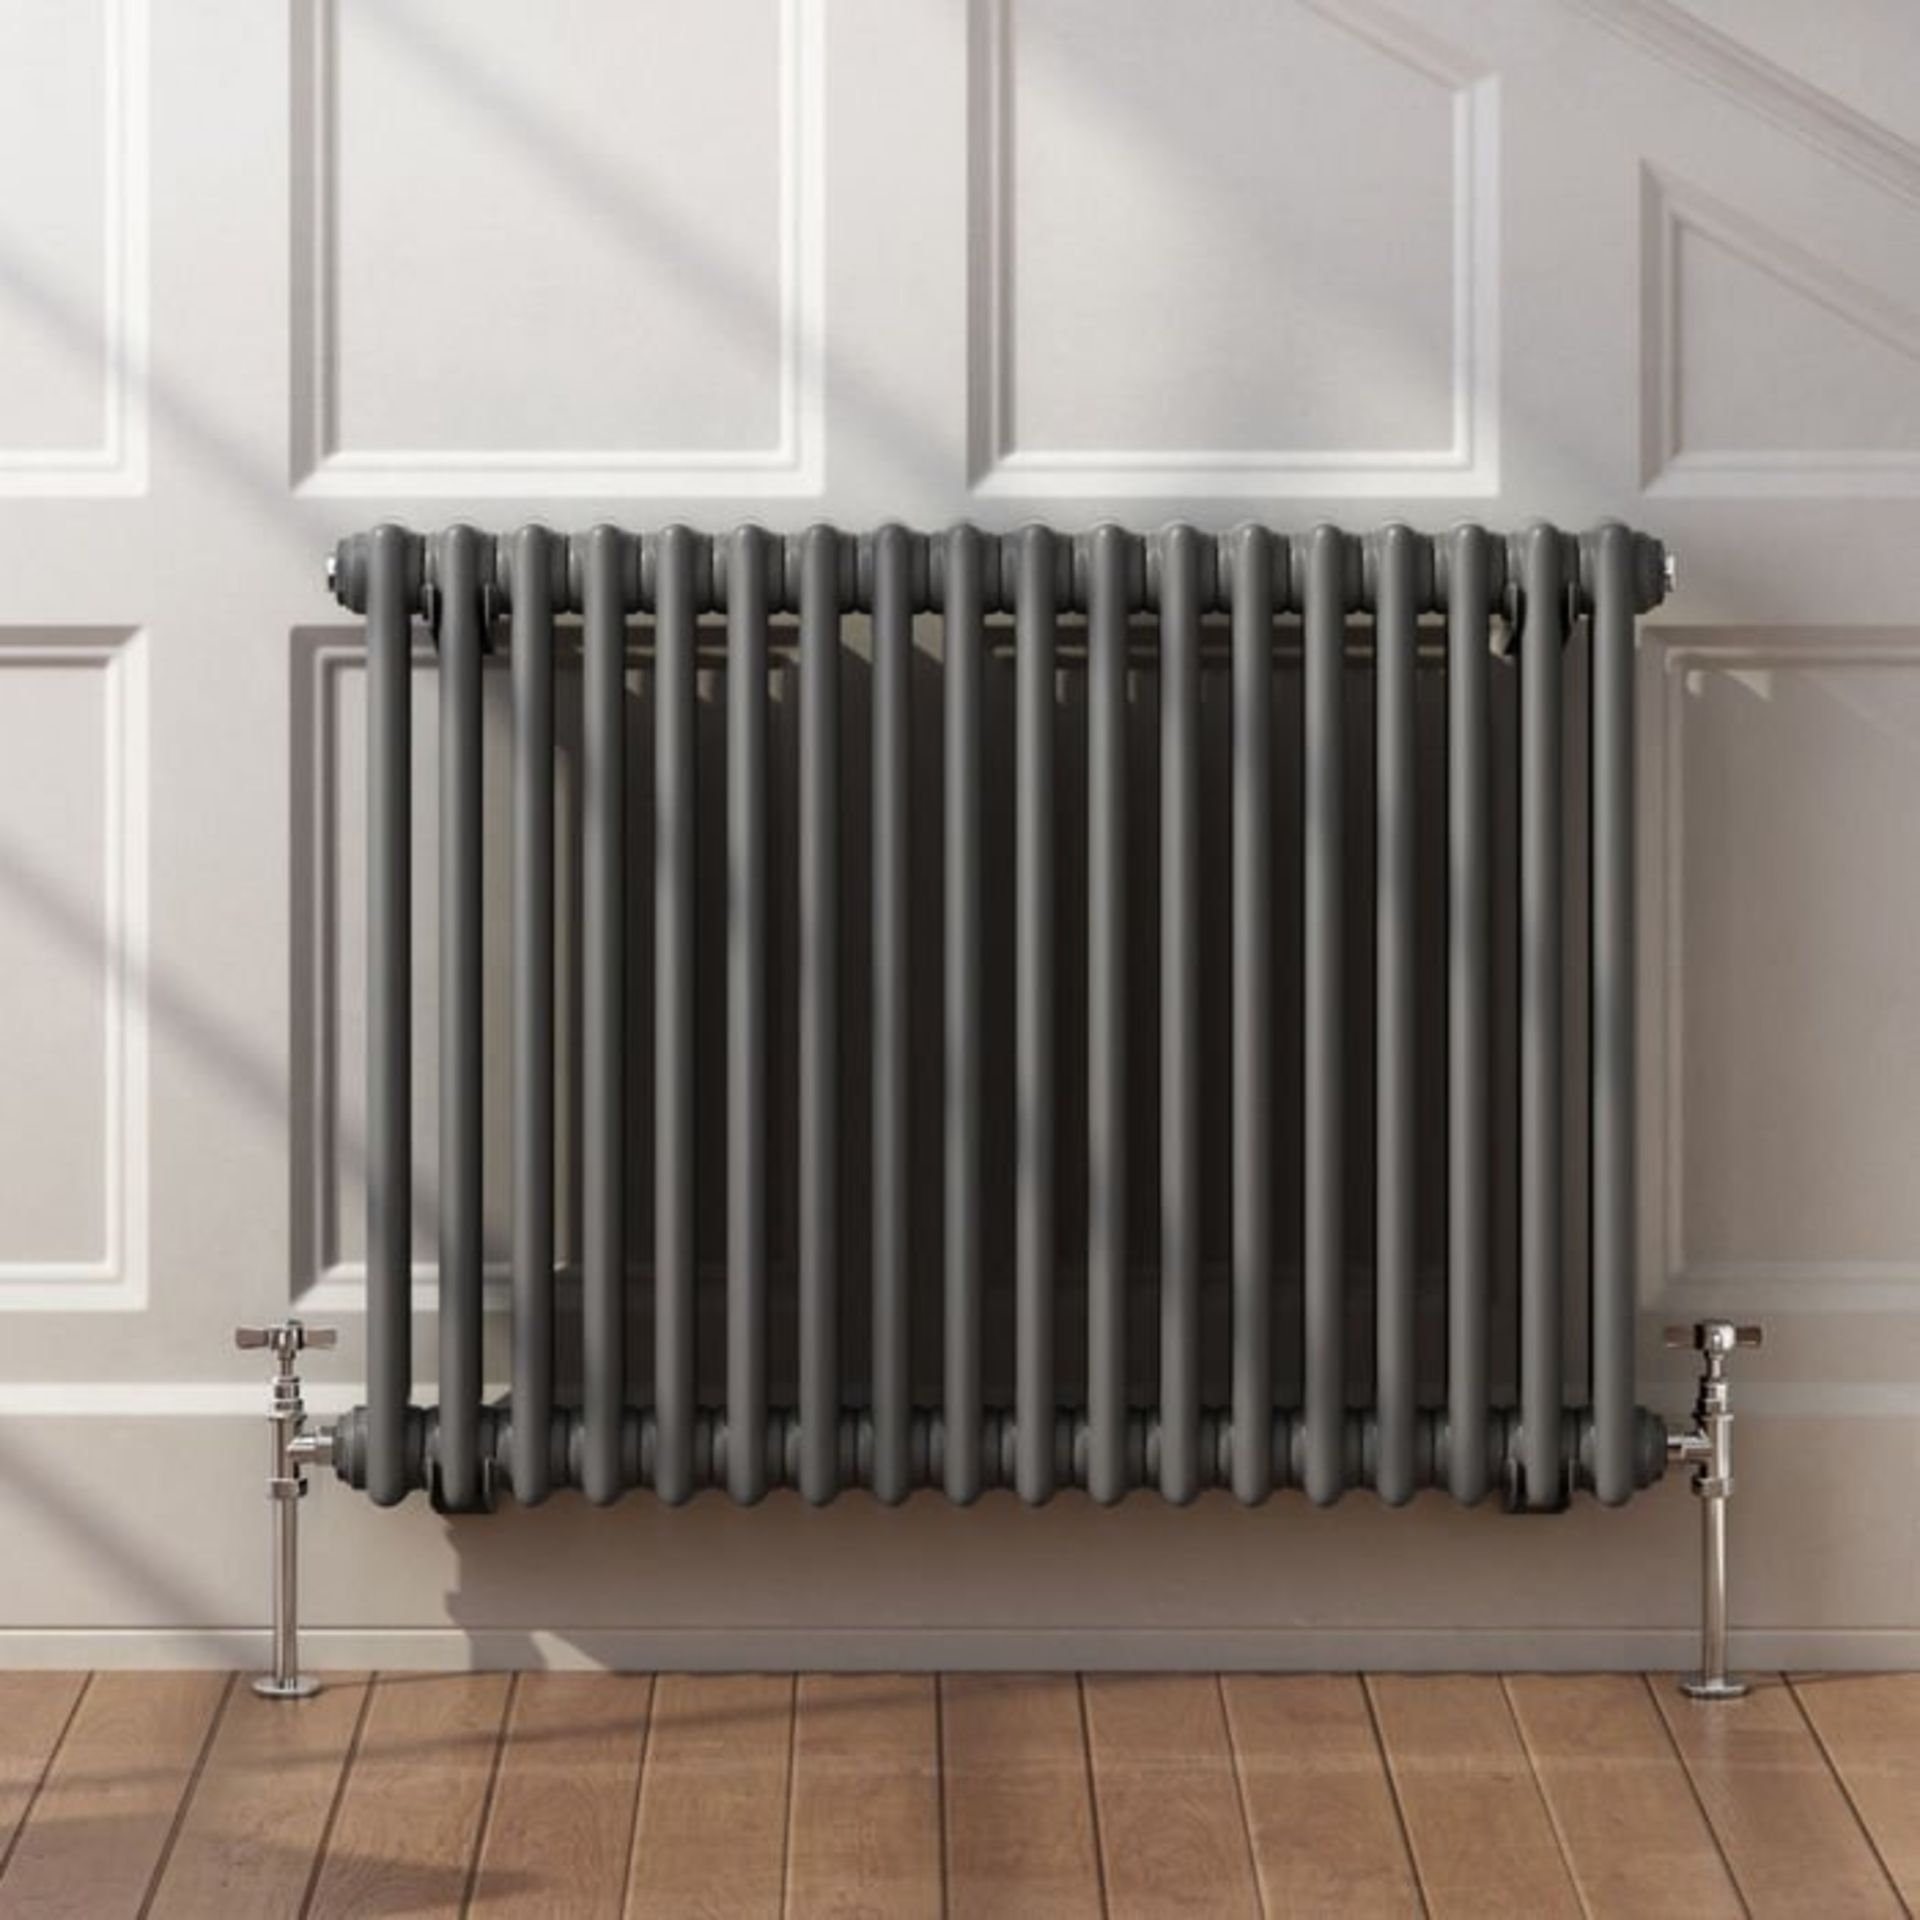 (S203) 600x828mm Anthracite Double Panel Horizontal Colosseum Traditional Radiator. RRP £447.99. - Image 2 of 4